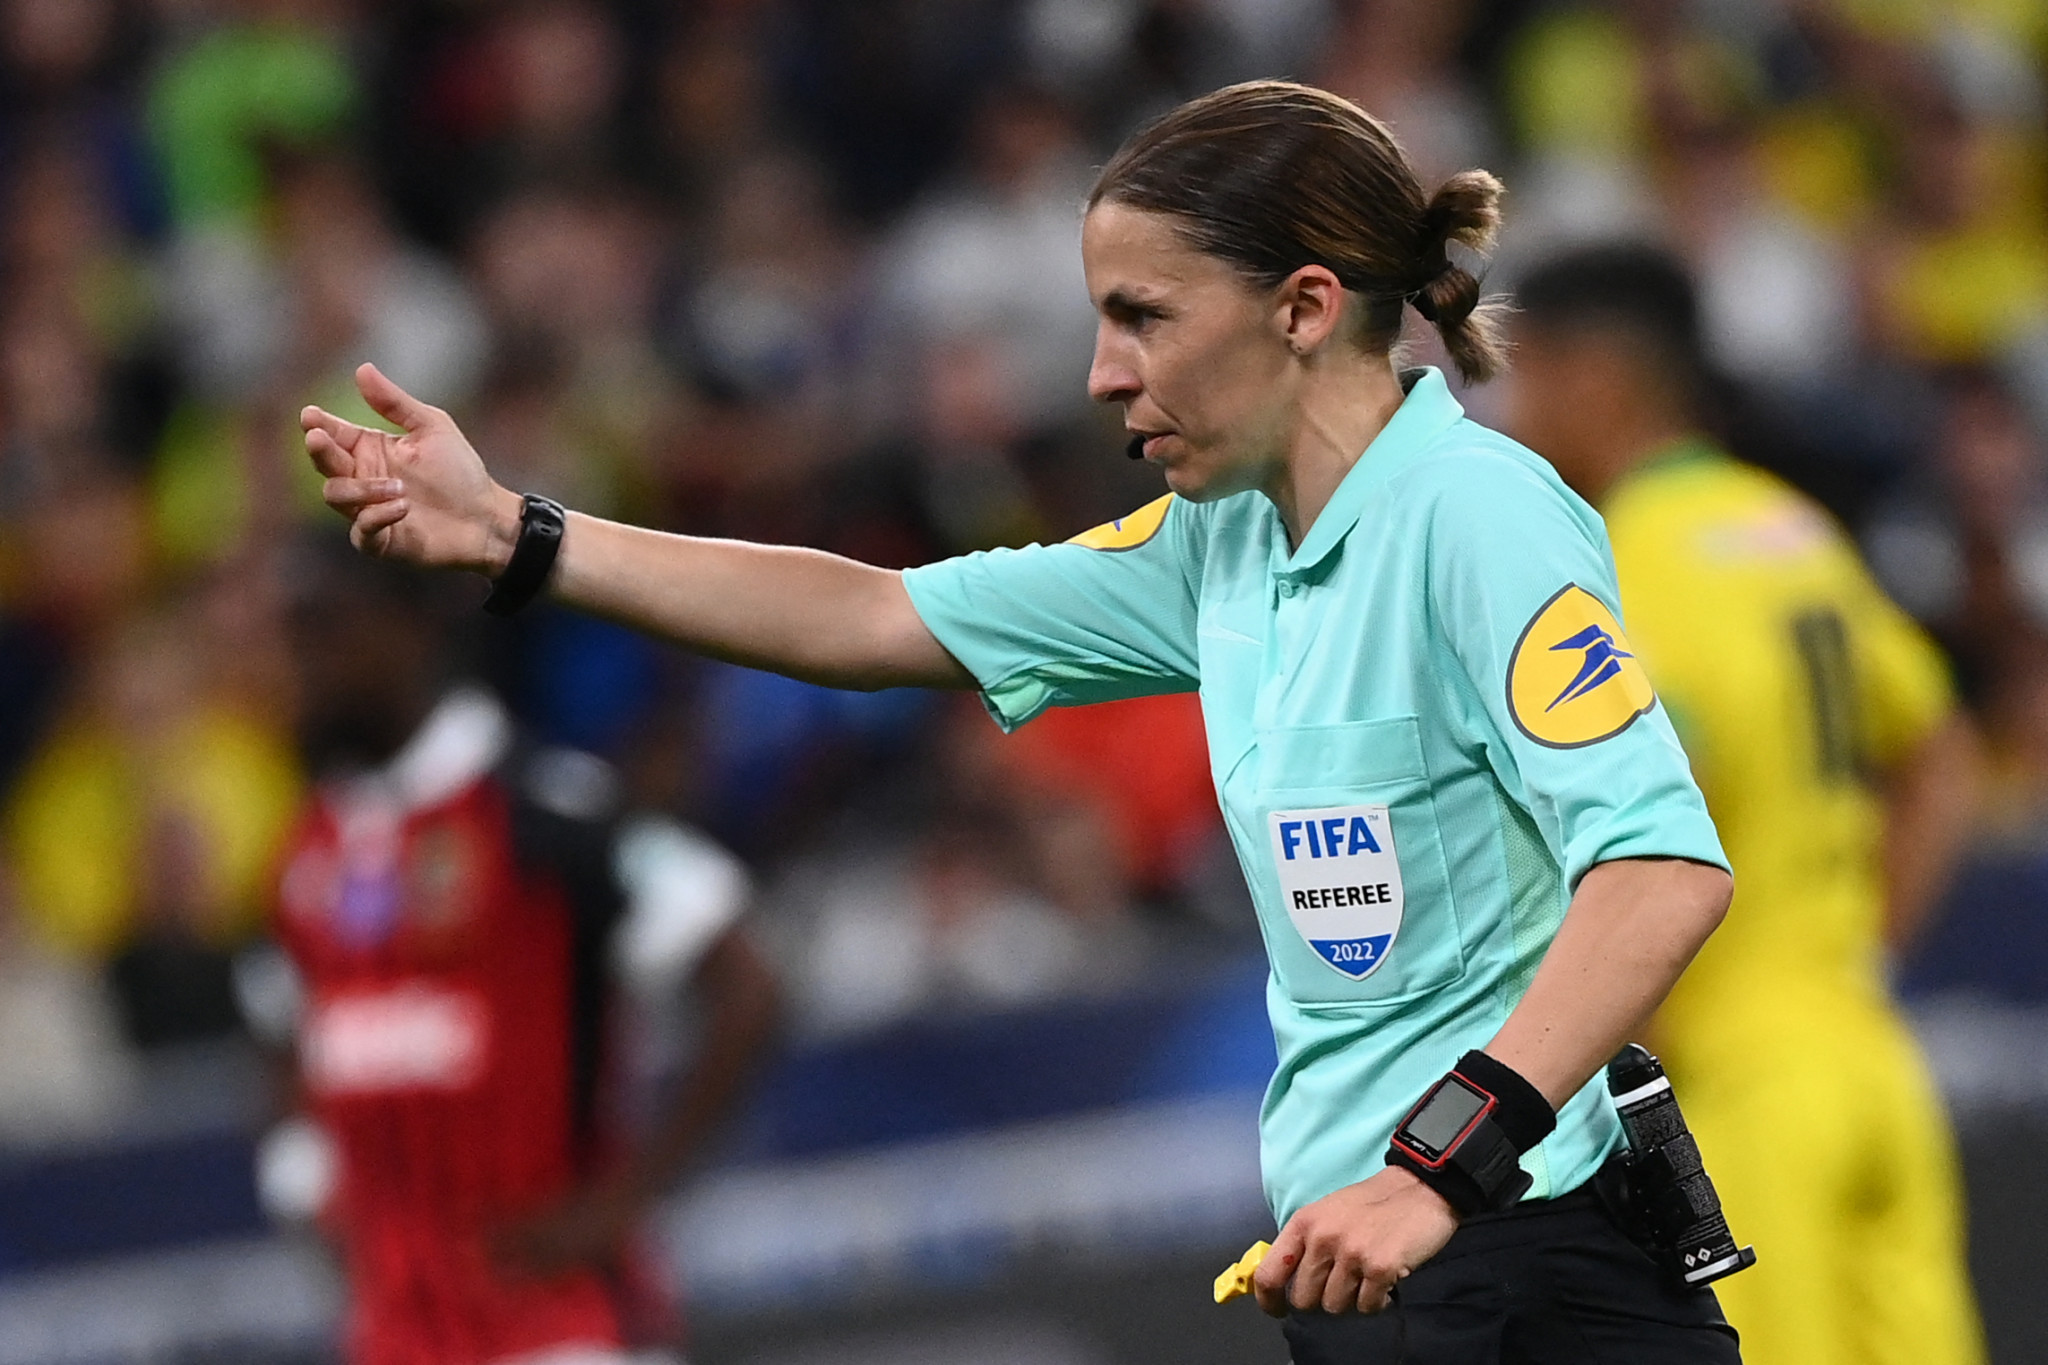 Stéphanie Frappart is one of three women picked to be a referee at the FIFA World Cup ©Getty Images